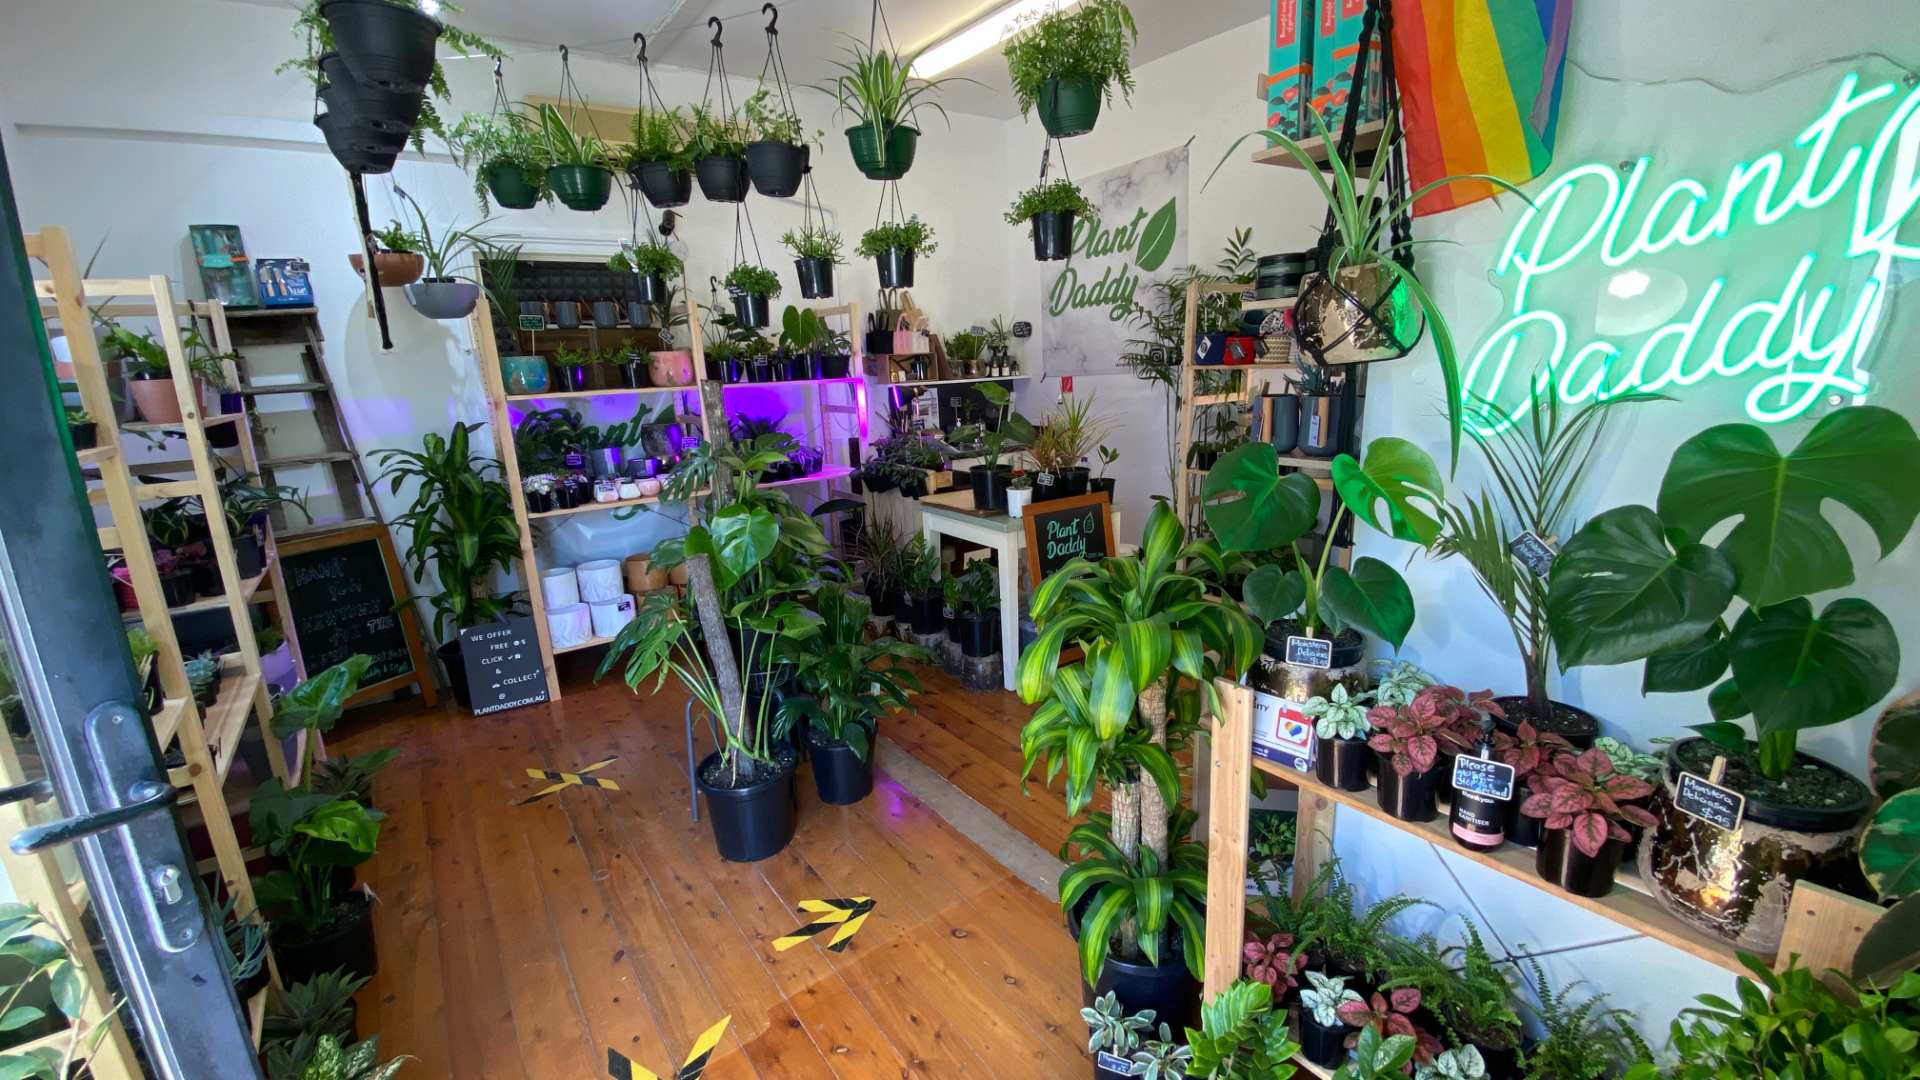 Plant Daddy Is the New Newtown Plant Studio That'll Help You Fill Your Home with Greenery